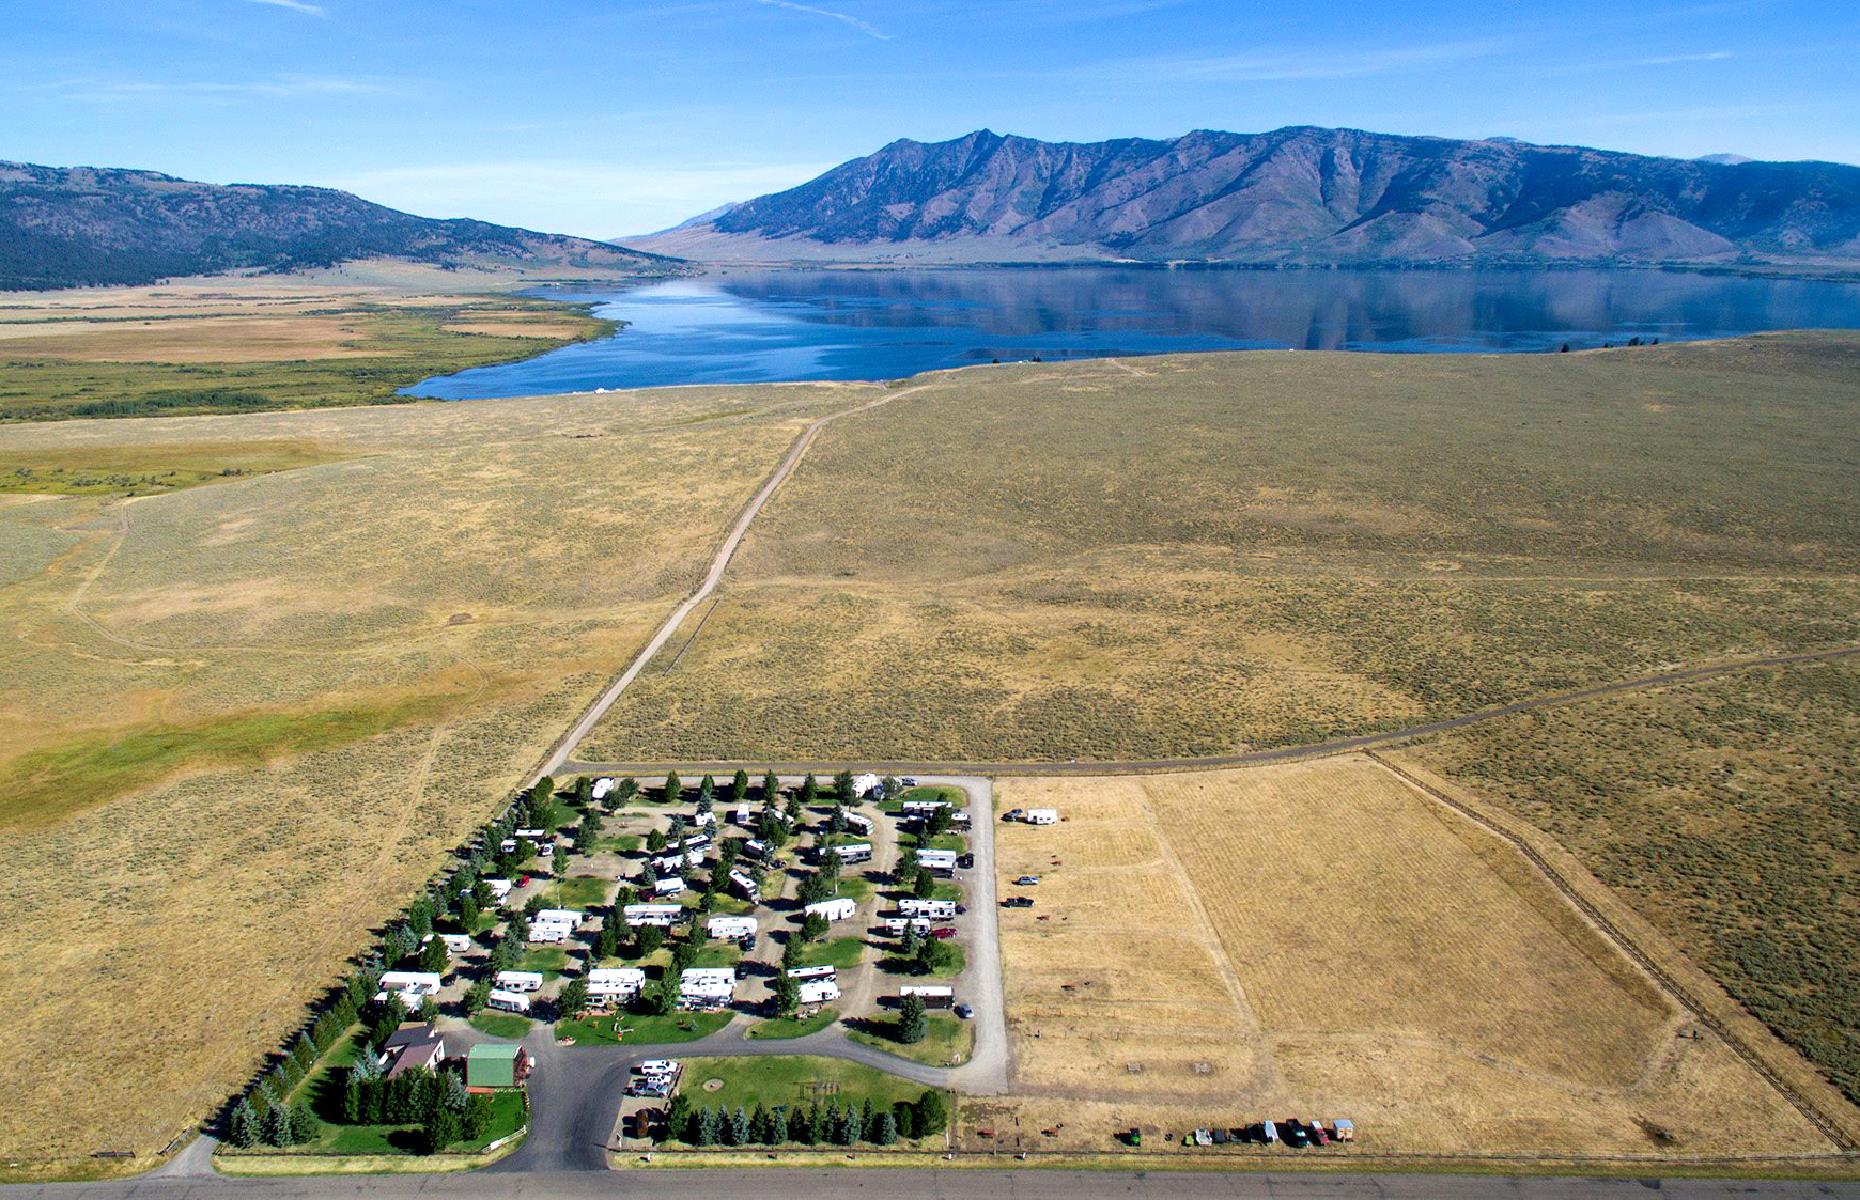 <p>With a name like "Red Rock", <a href="https://redrockrvpark.com/">this RV park</a> might sound like it belongs in America's southwest, but it's actually tucked away with the mountains and lakes of eastern Idaho. The park prides itself on its proximity to nature – it's 22 miles (35km) from the western entrance to Yellowstone (be sure to <a href="https://www.nps.gov/yell/index.htm">check the NPS site</a> for status updates if you're planning a visit) and vast Henry's Lake is right on the doorstep. It offers full hook-ups, plus private picnic tables and firepits too. </p>